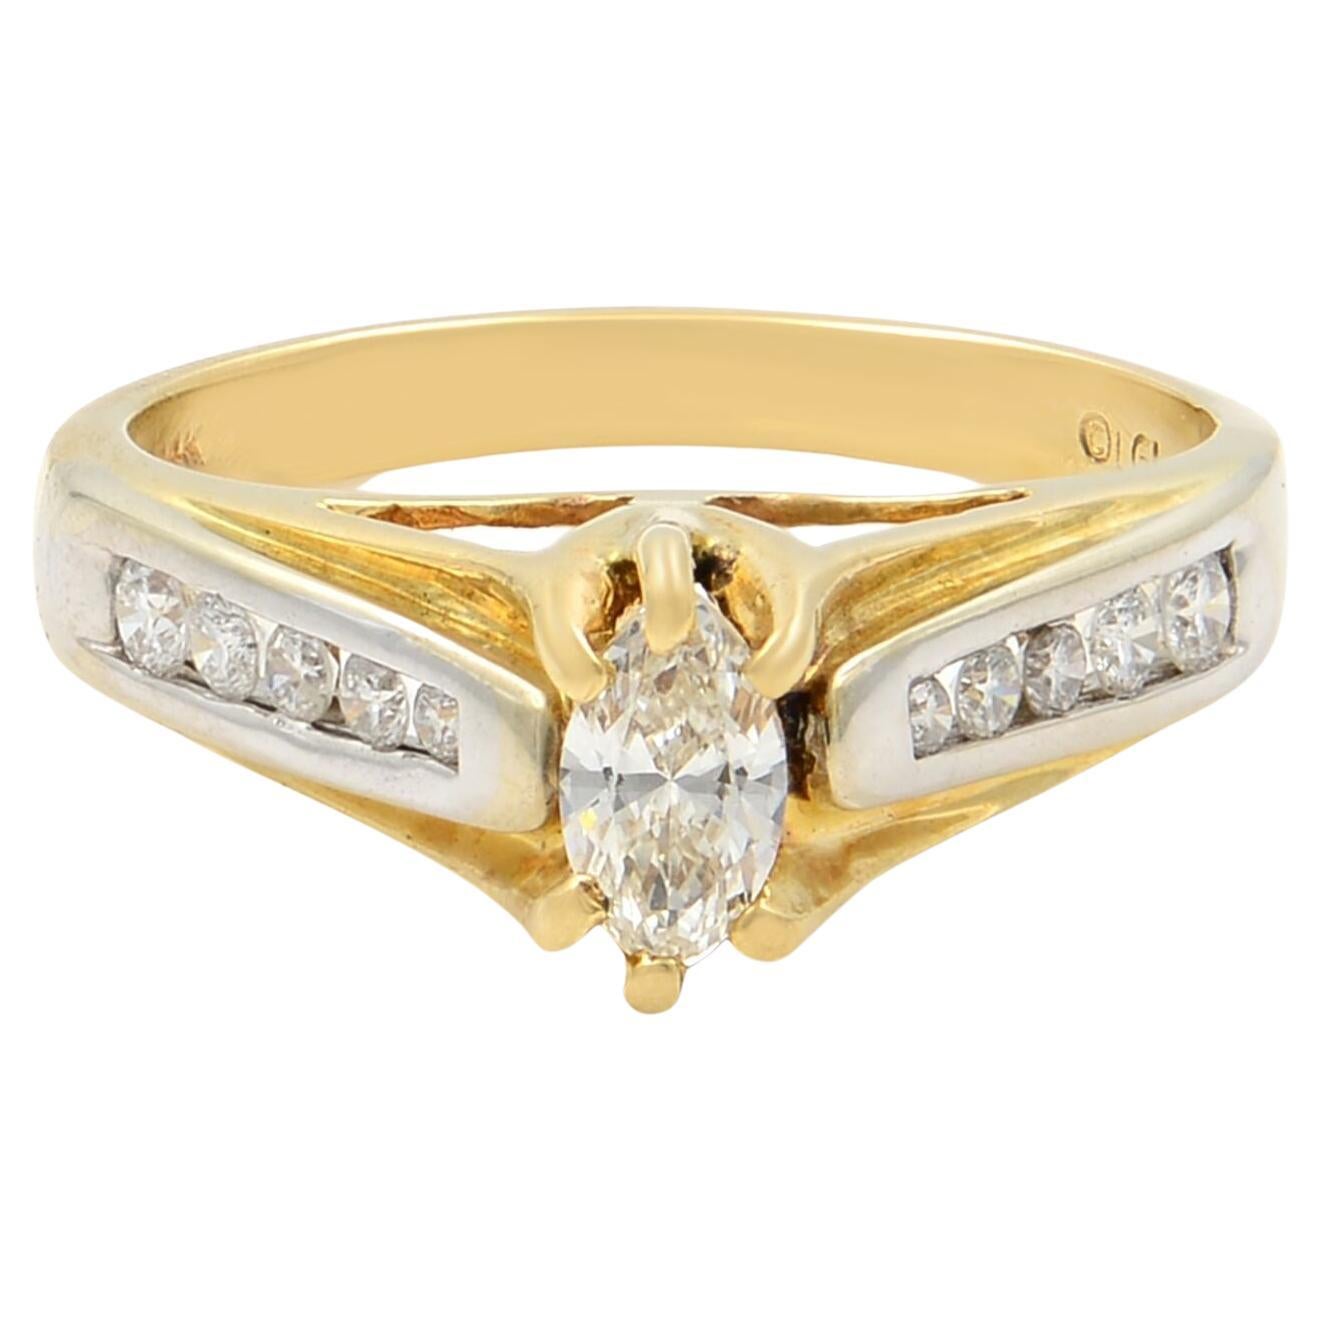 Marquise Cut Diamond Engagement Ring 14K Yellow and White Gold 0.80Cttw SZ 6.75 For Sale